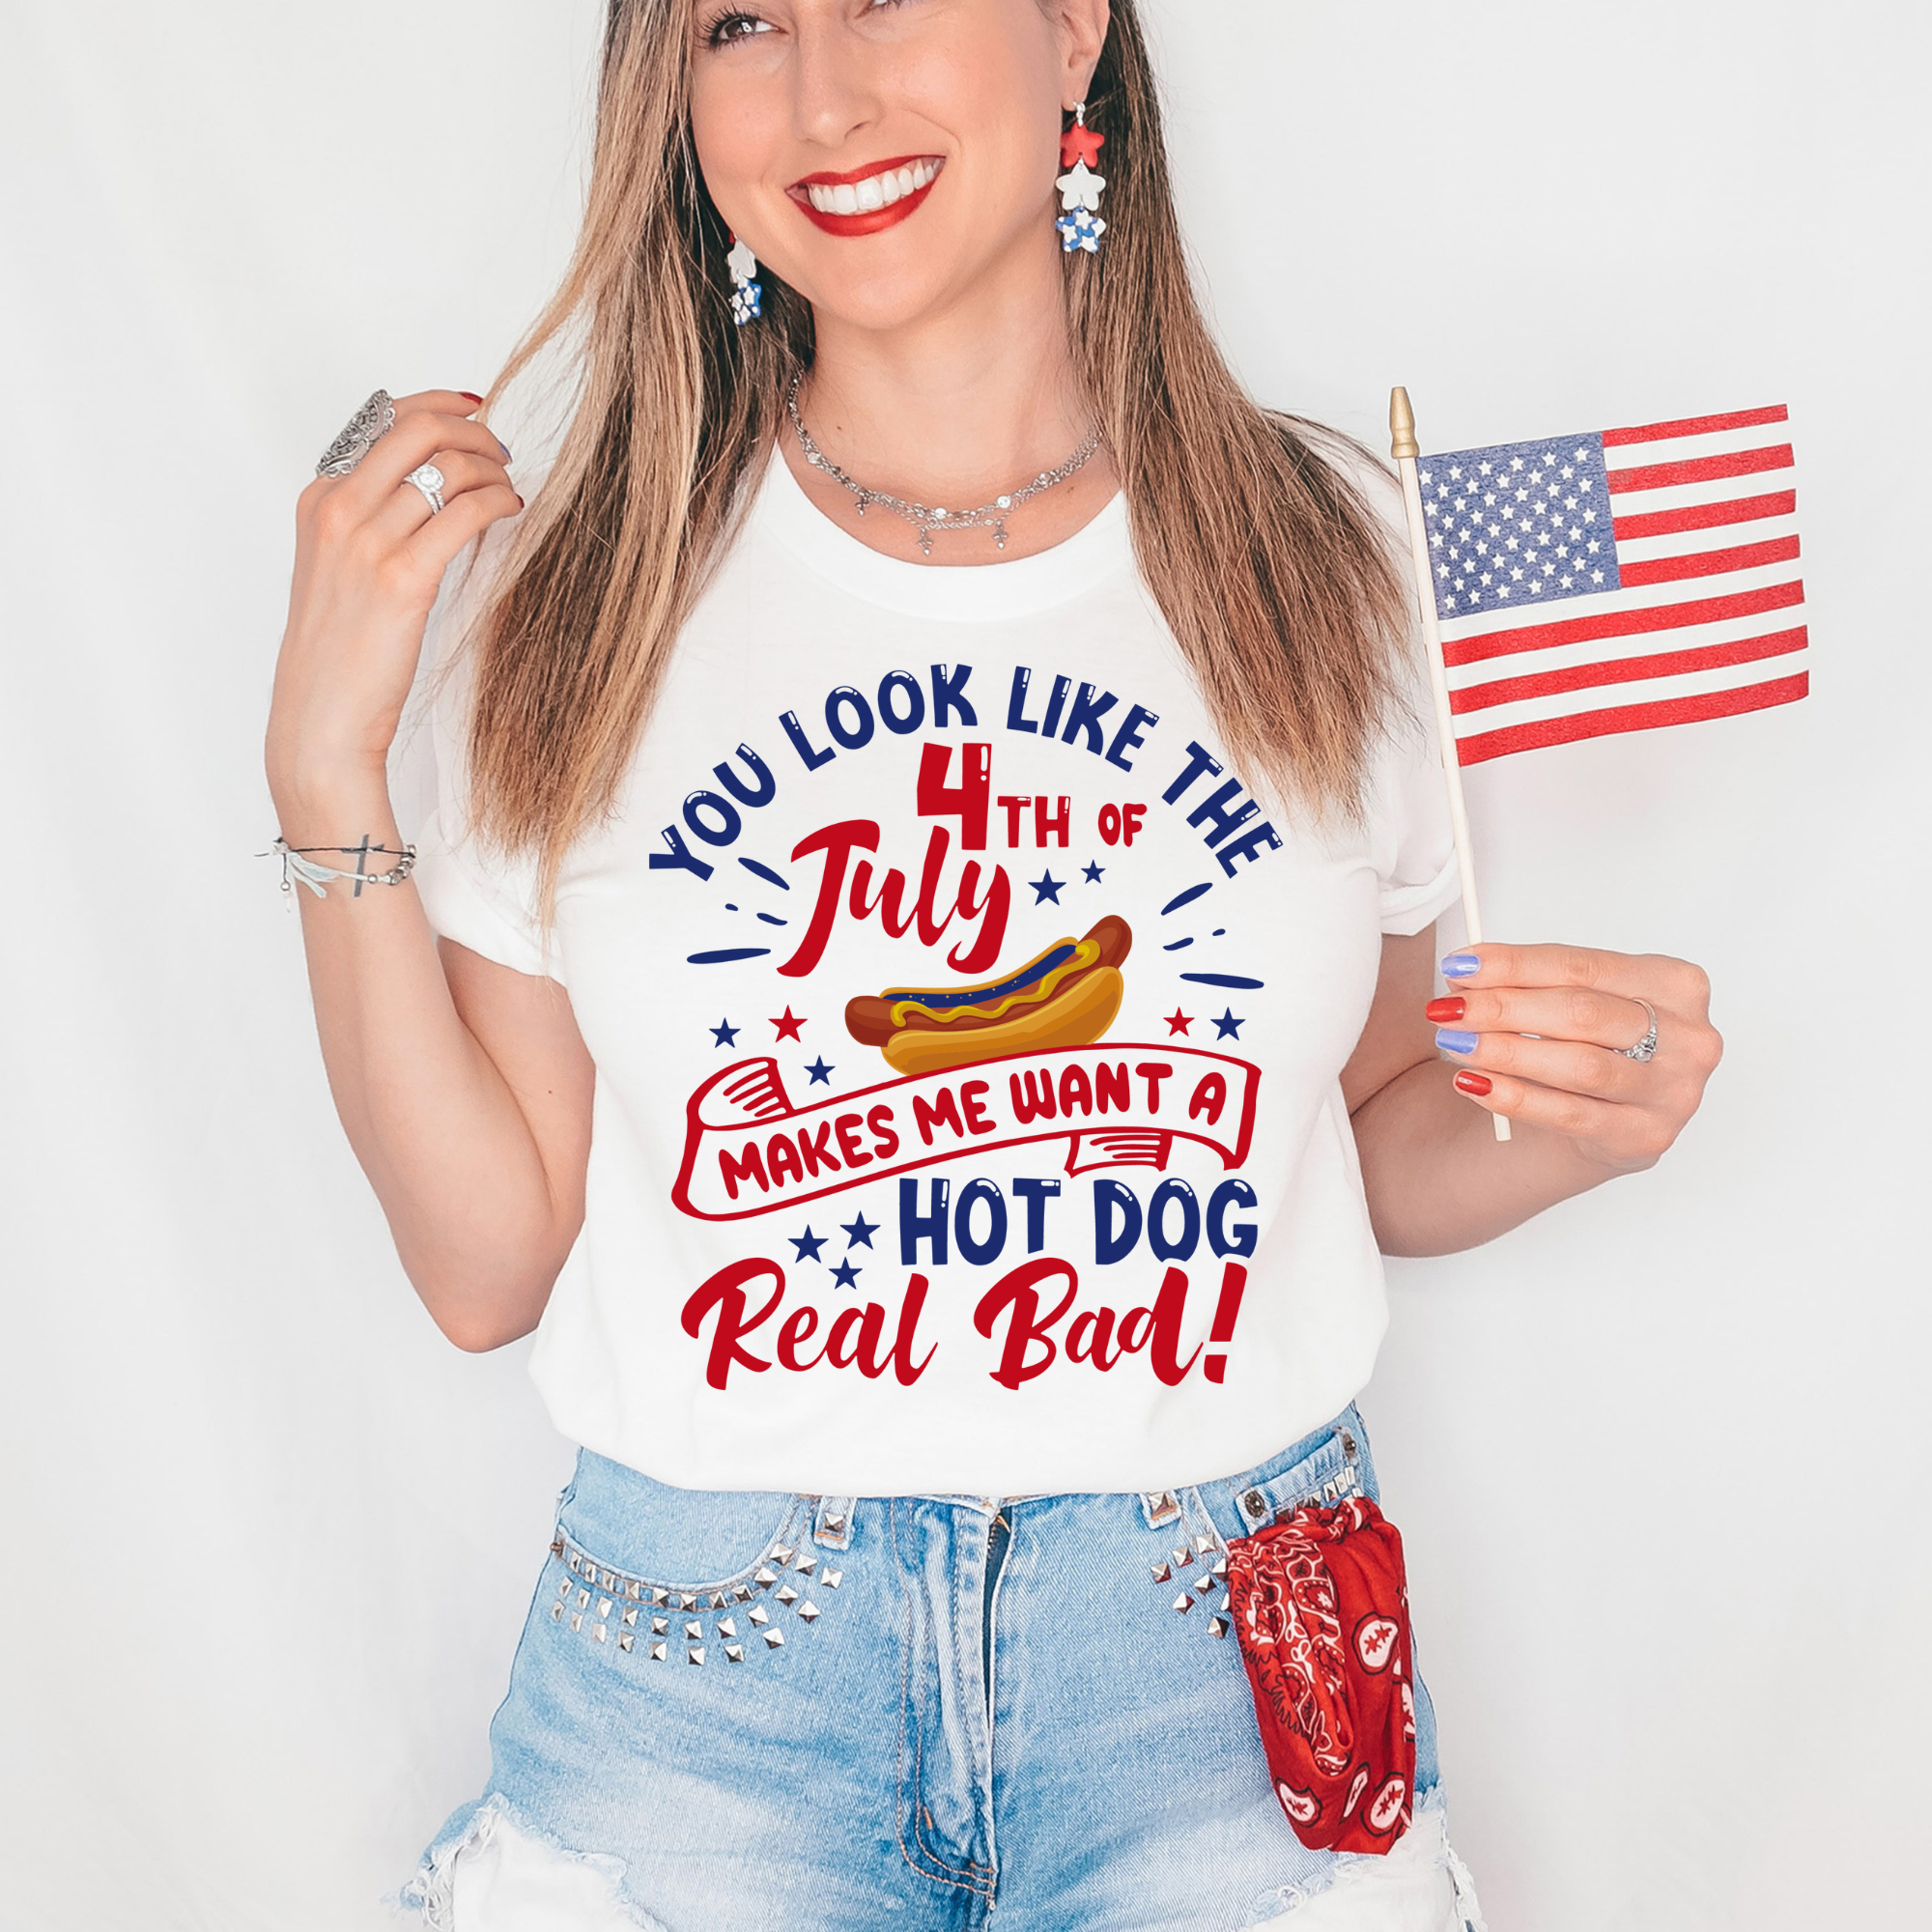 Hilarious Patriotic BBQ T Shirt for 4th Of July *UNISEX FIT*-Graphic Tees-208 Tees Wholesale, Idaho